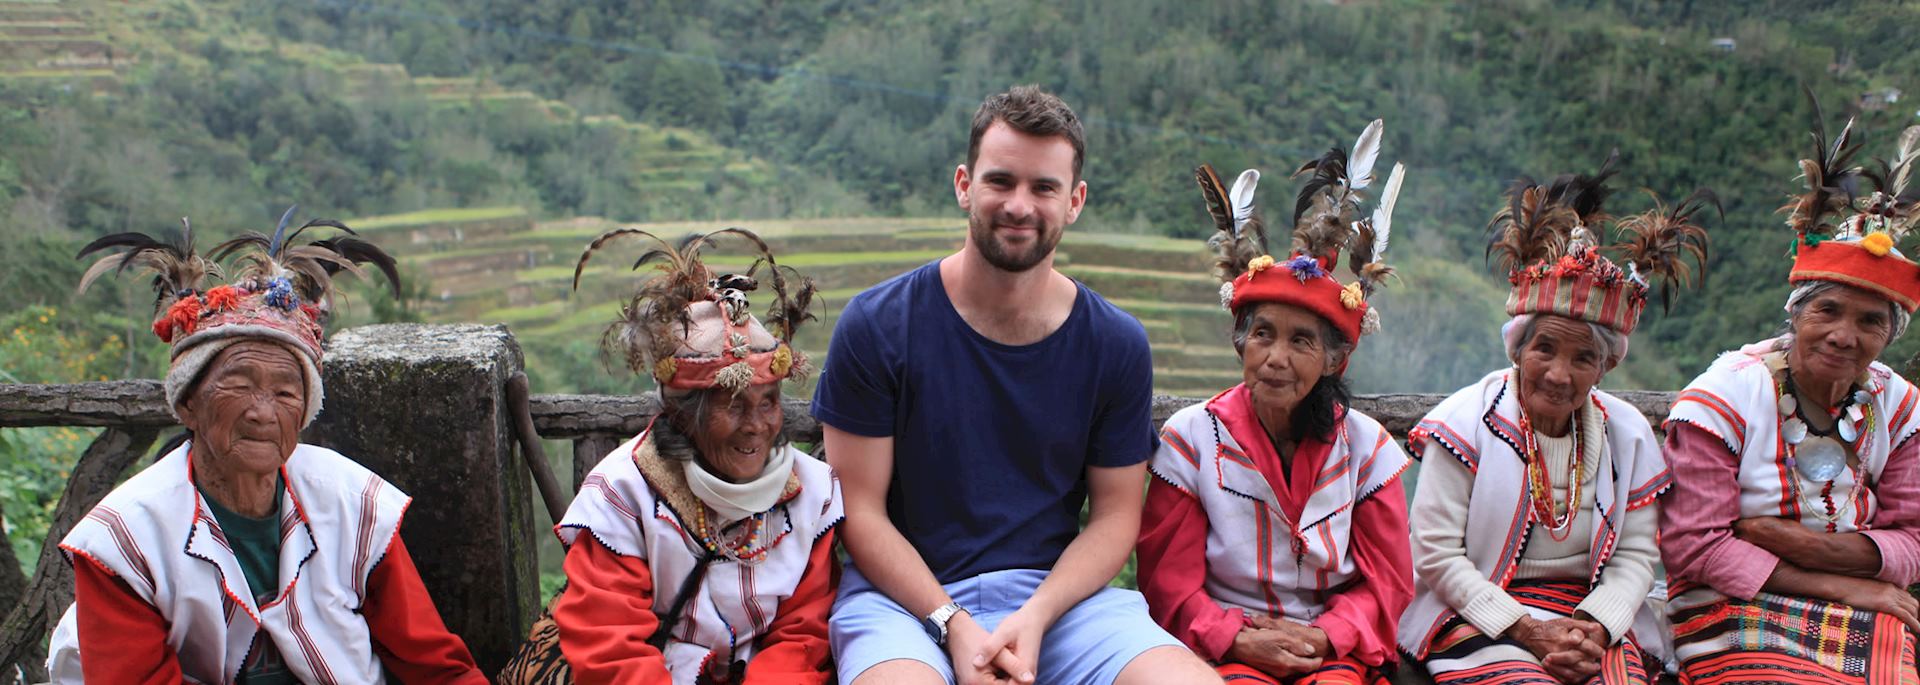 Mat with the local rice farmers in their traditional dress, Banaue, Philippines